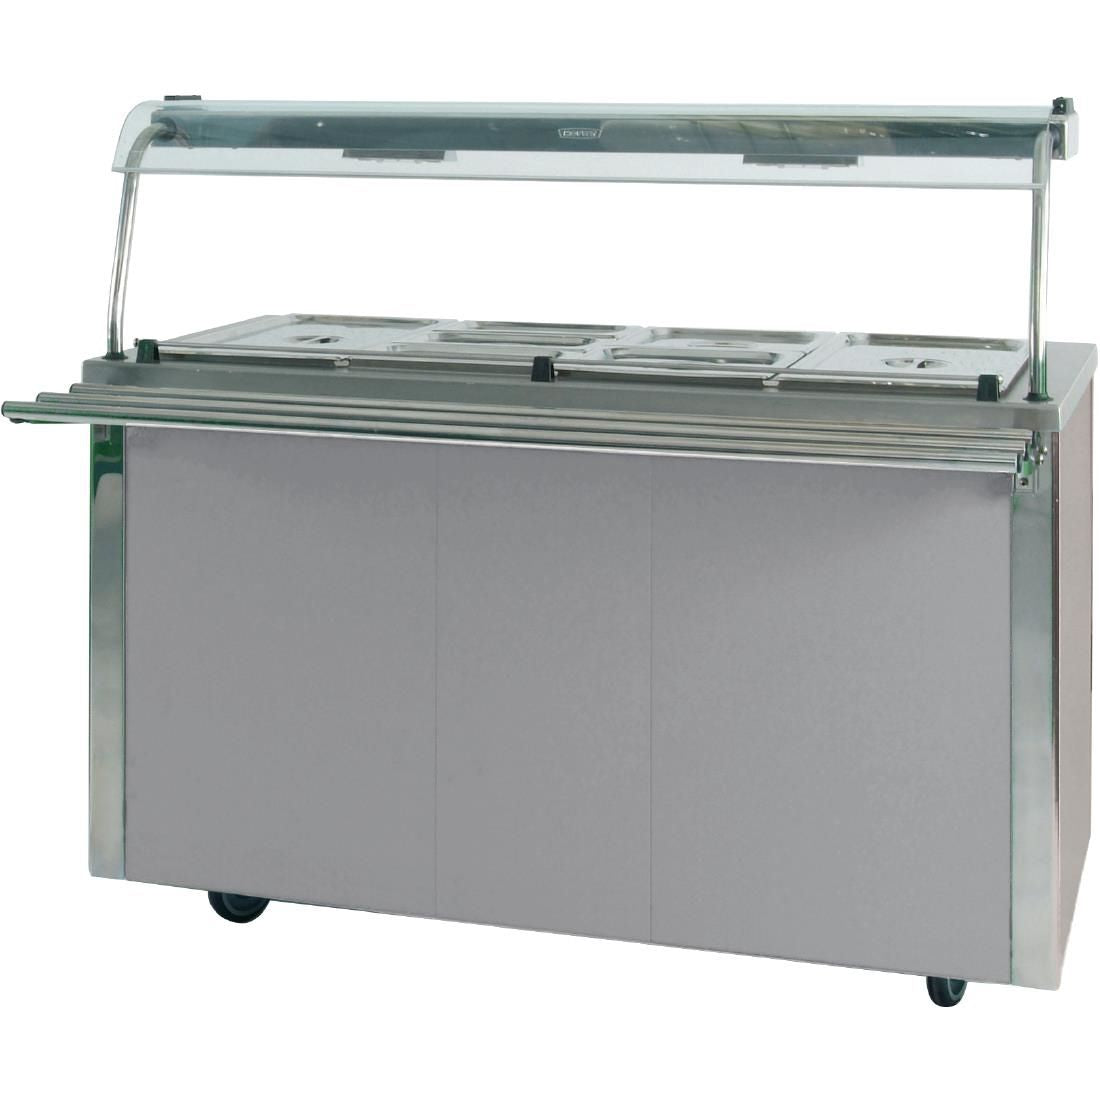 DR409 Moffat Versicarte Plus Hot Food Service Counter With Bain Marie VCBM4 JD Catering Equipment Solutions Ltd